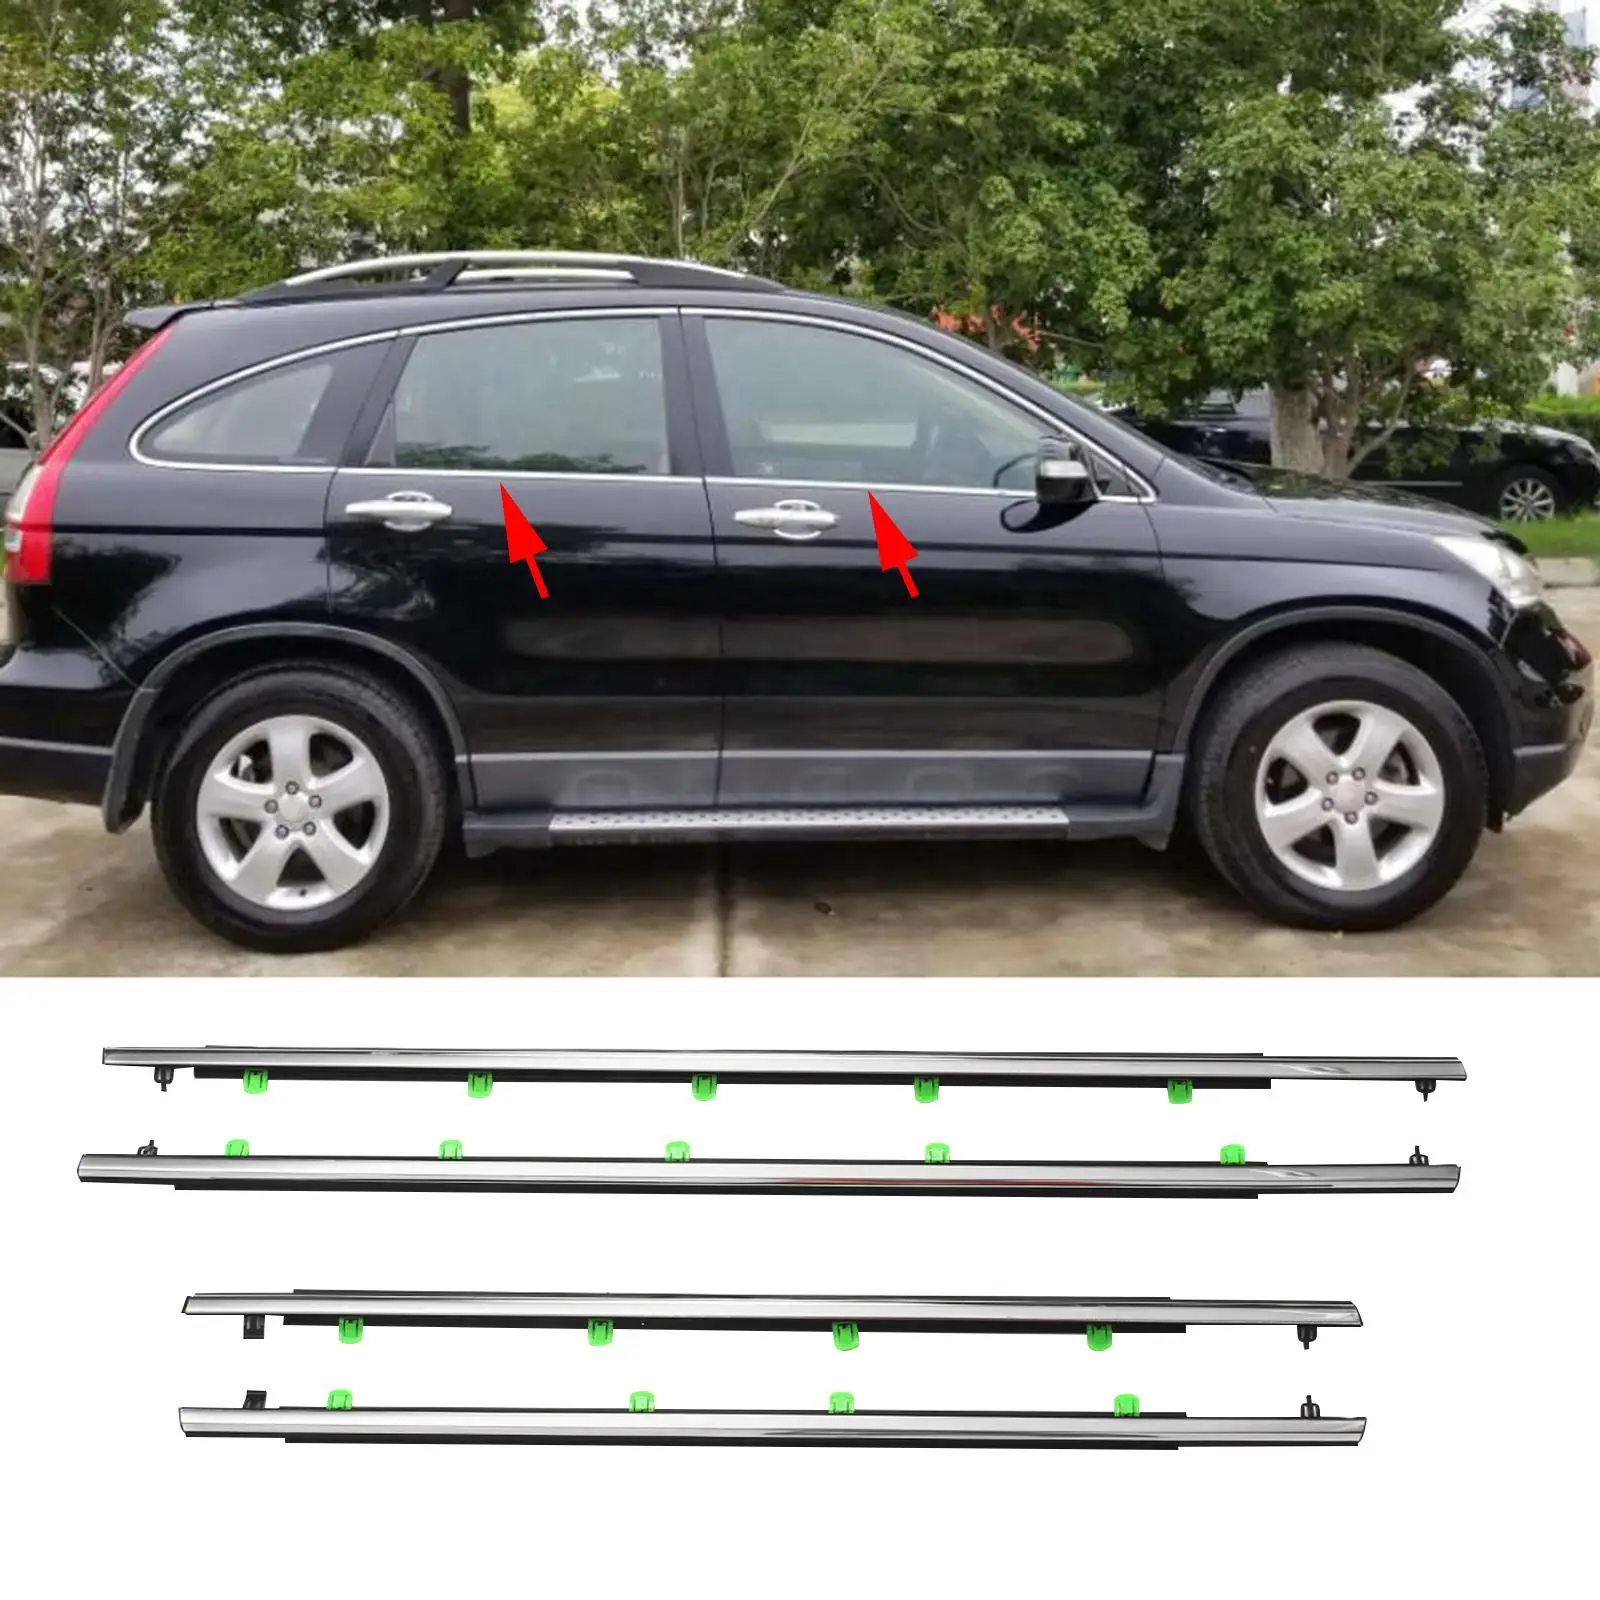 4 Pieces Windows Easy to Install Spare Parts Replaces Premium Accessories Weatherstrip for Honda Cr-V 2007-2011